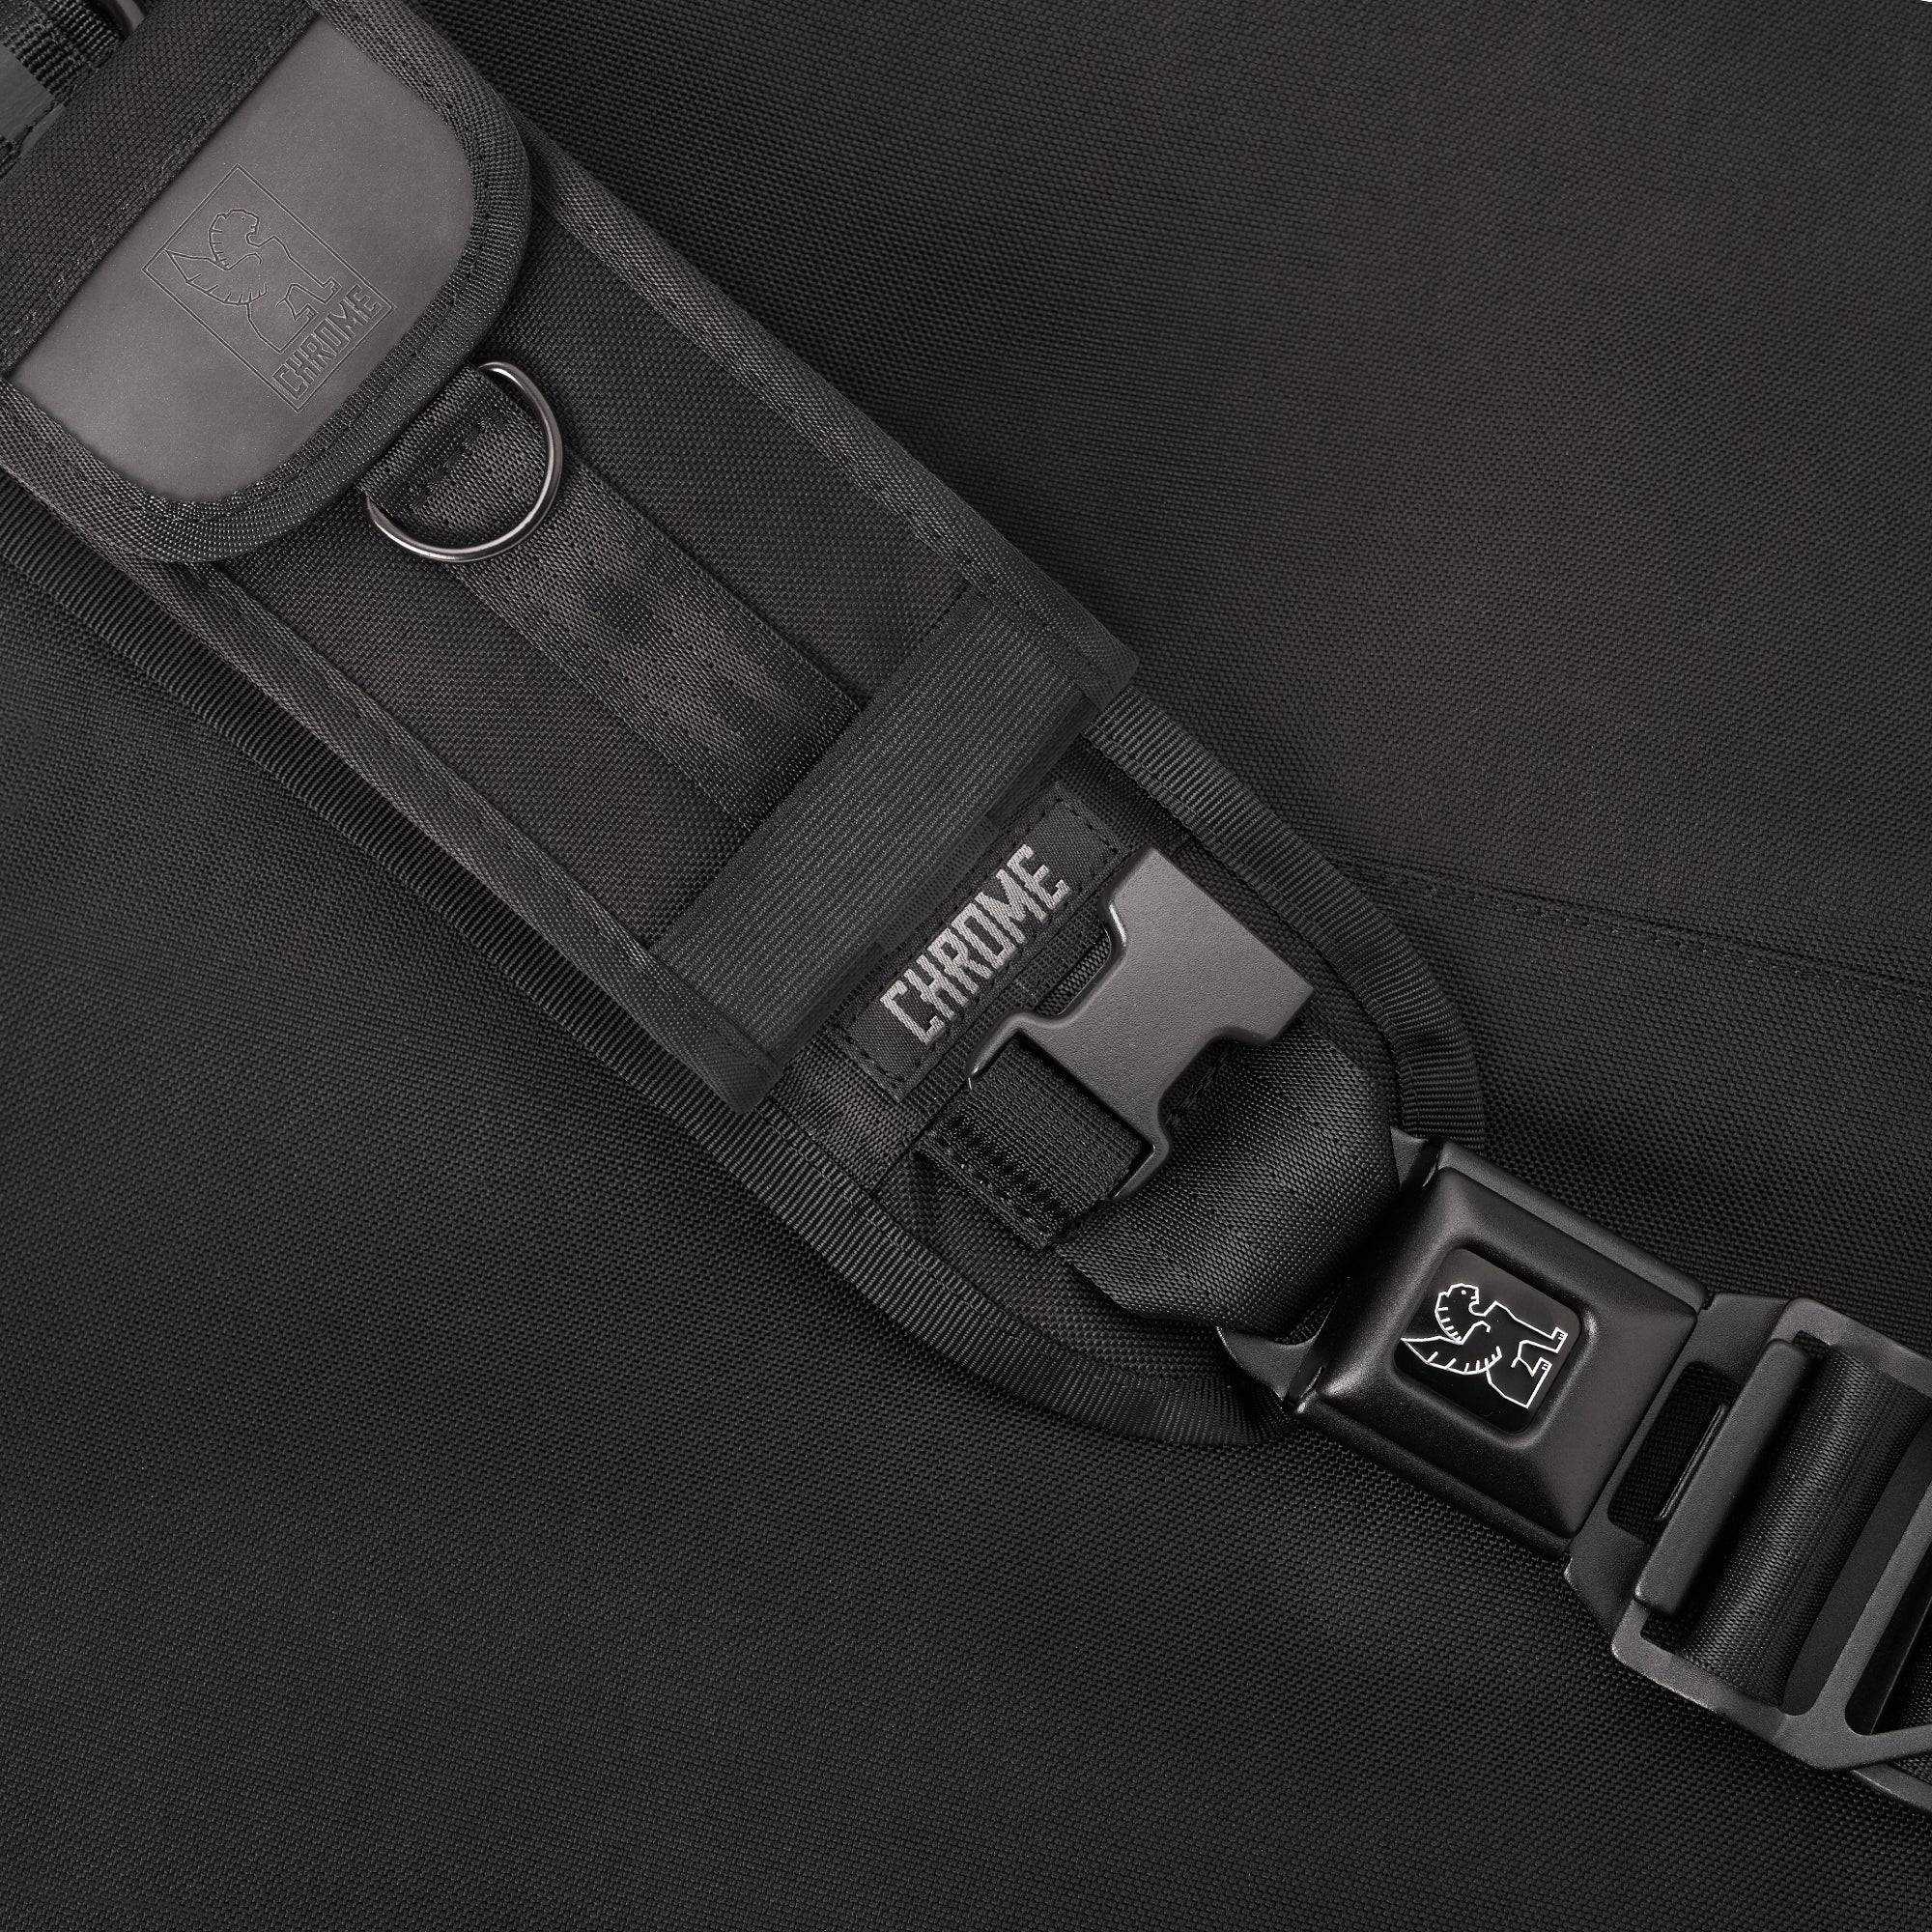 Large Phone Pouch in black attached to a Messenger bag strap